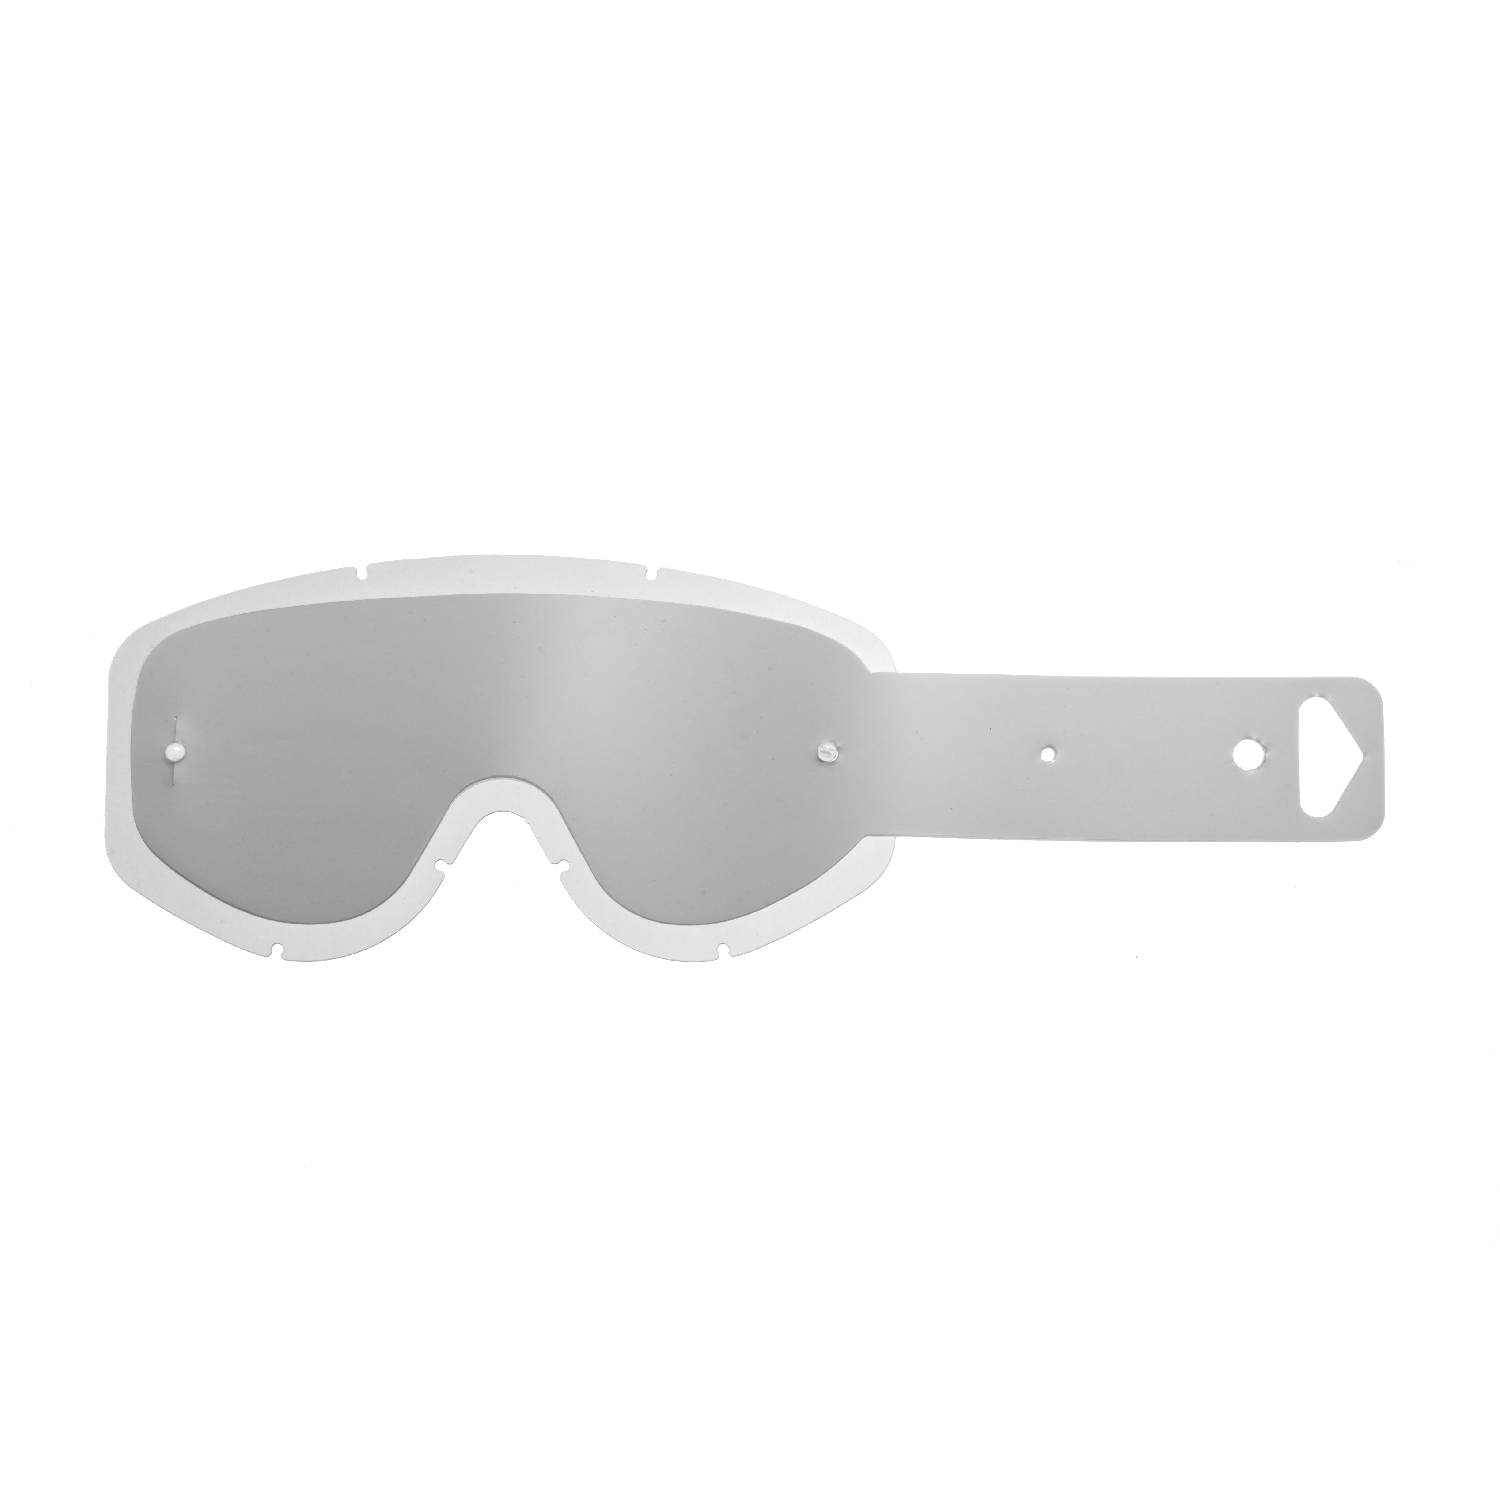 combo lenses with clear lenses with 10 tear off compatible for Scott 83/89 goggle